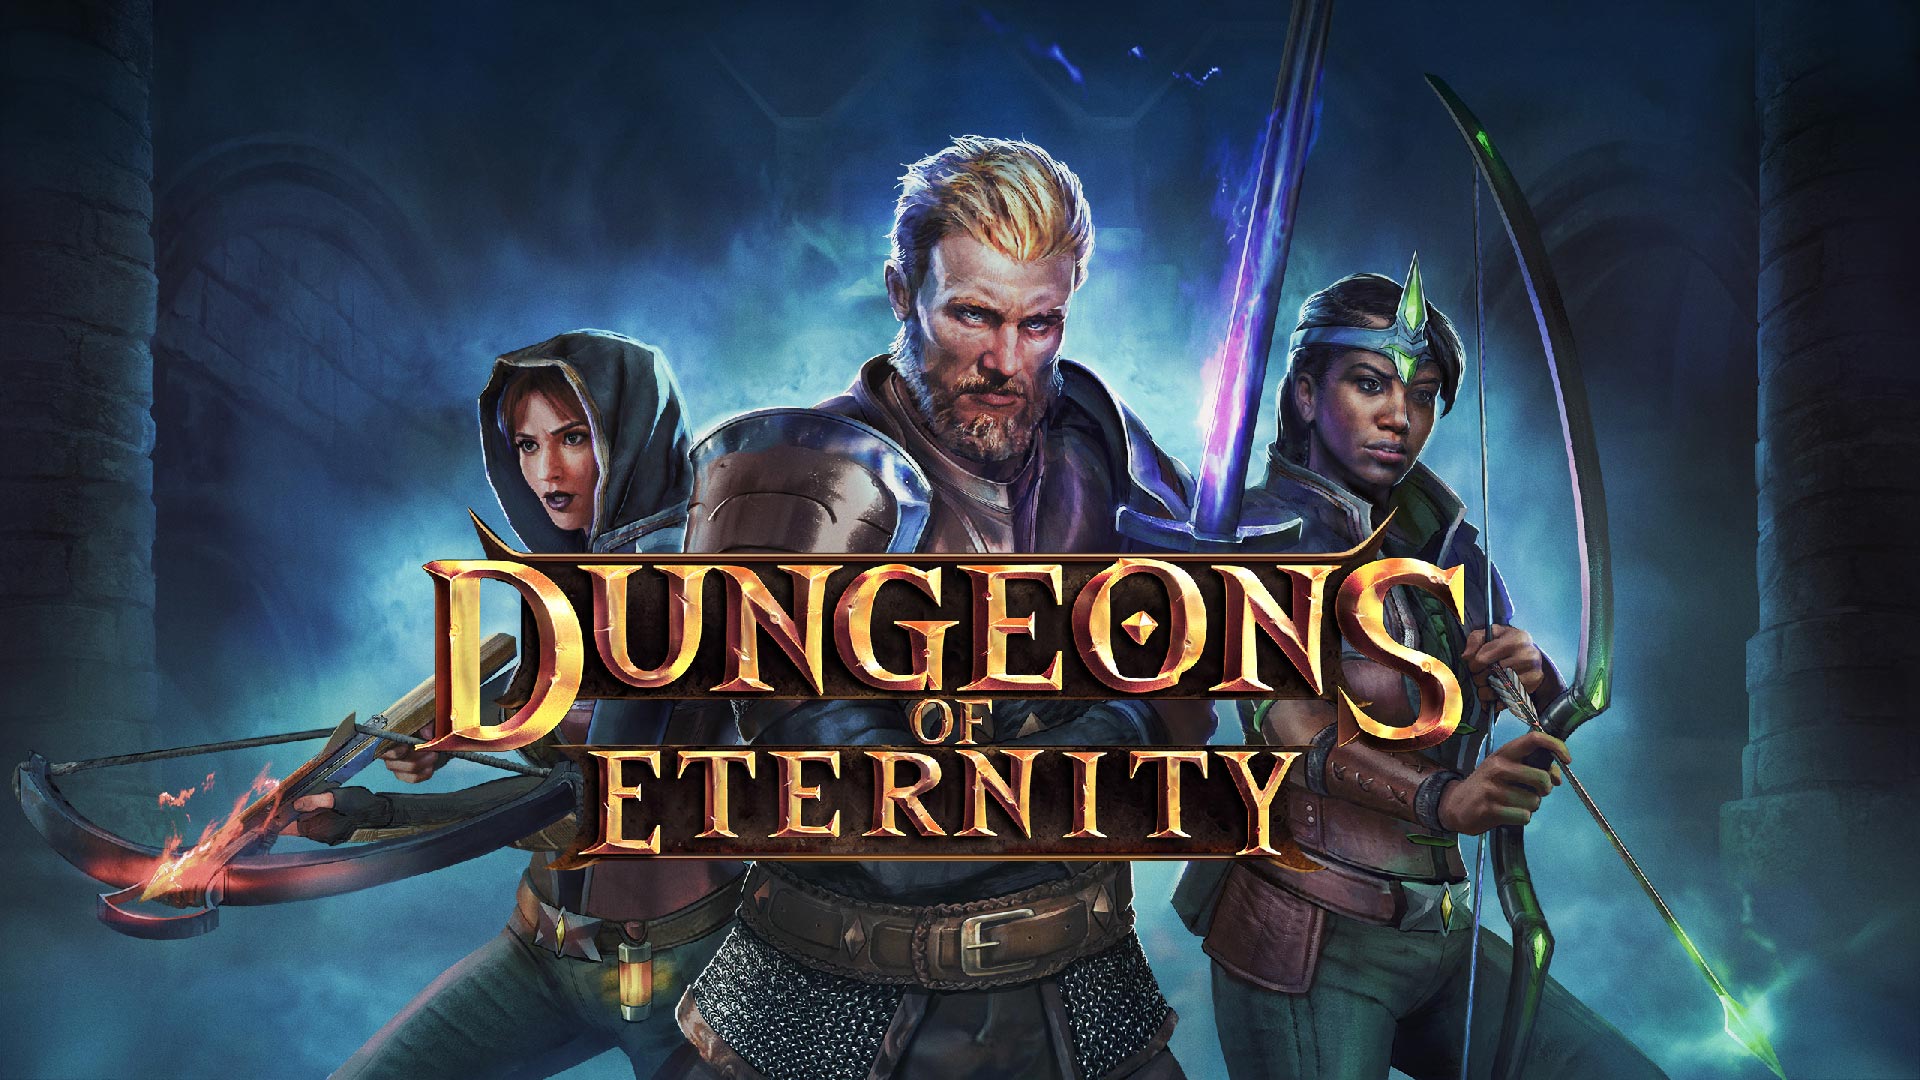 Co-op Dungeon Crawler ‘Dungeons of Eternity’ Unveiled From Studio Founded by Oculus Veterans – Road to VR